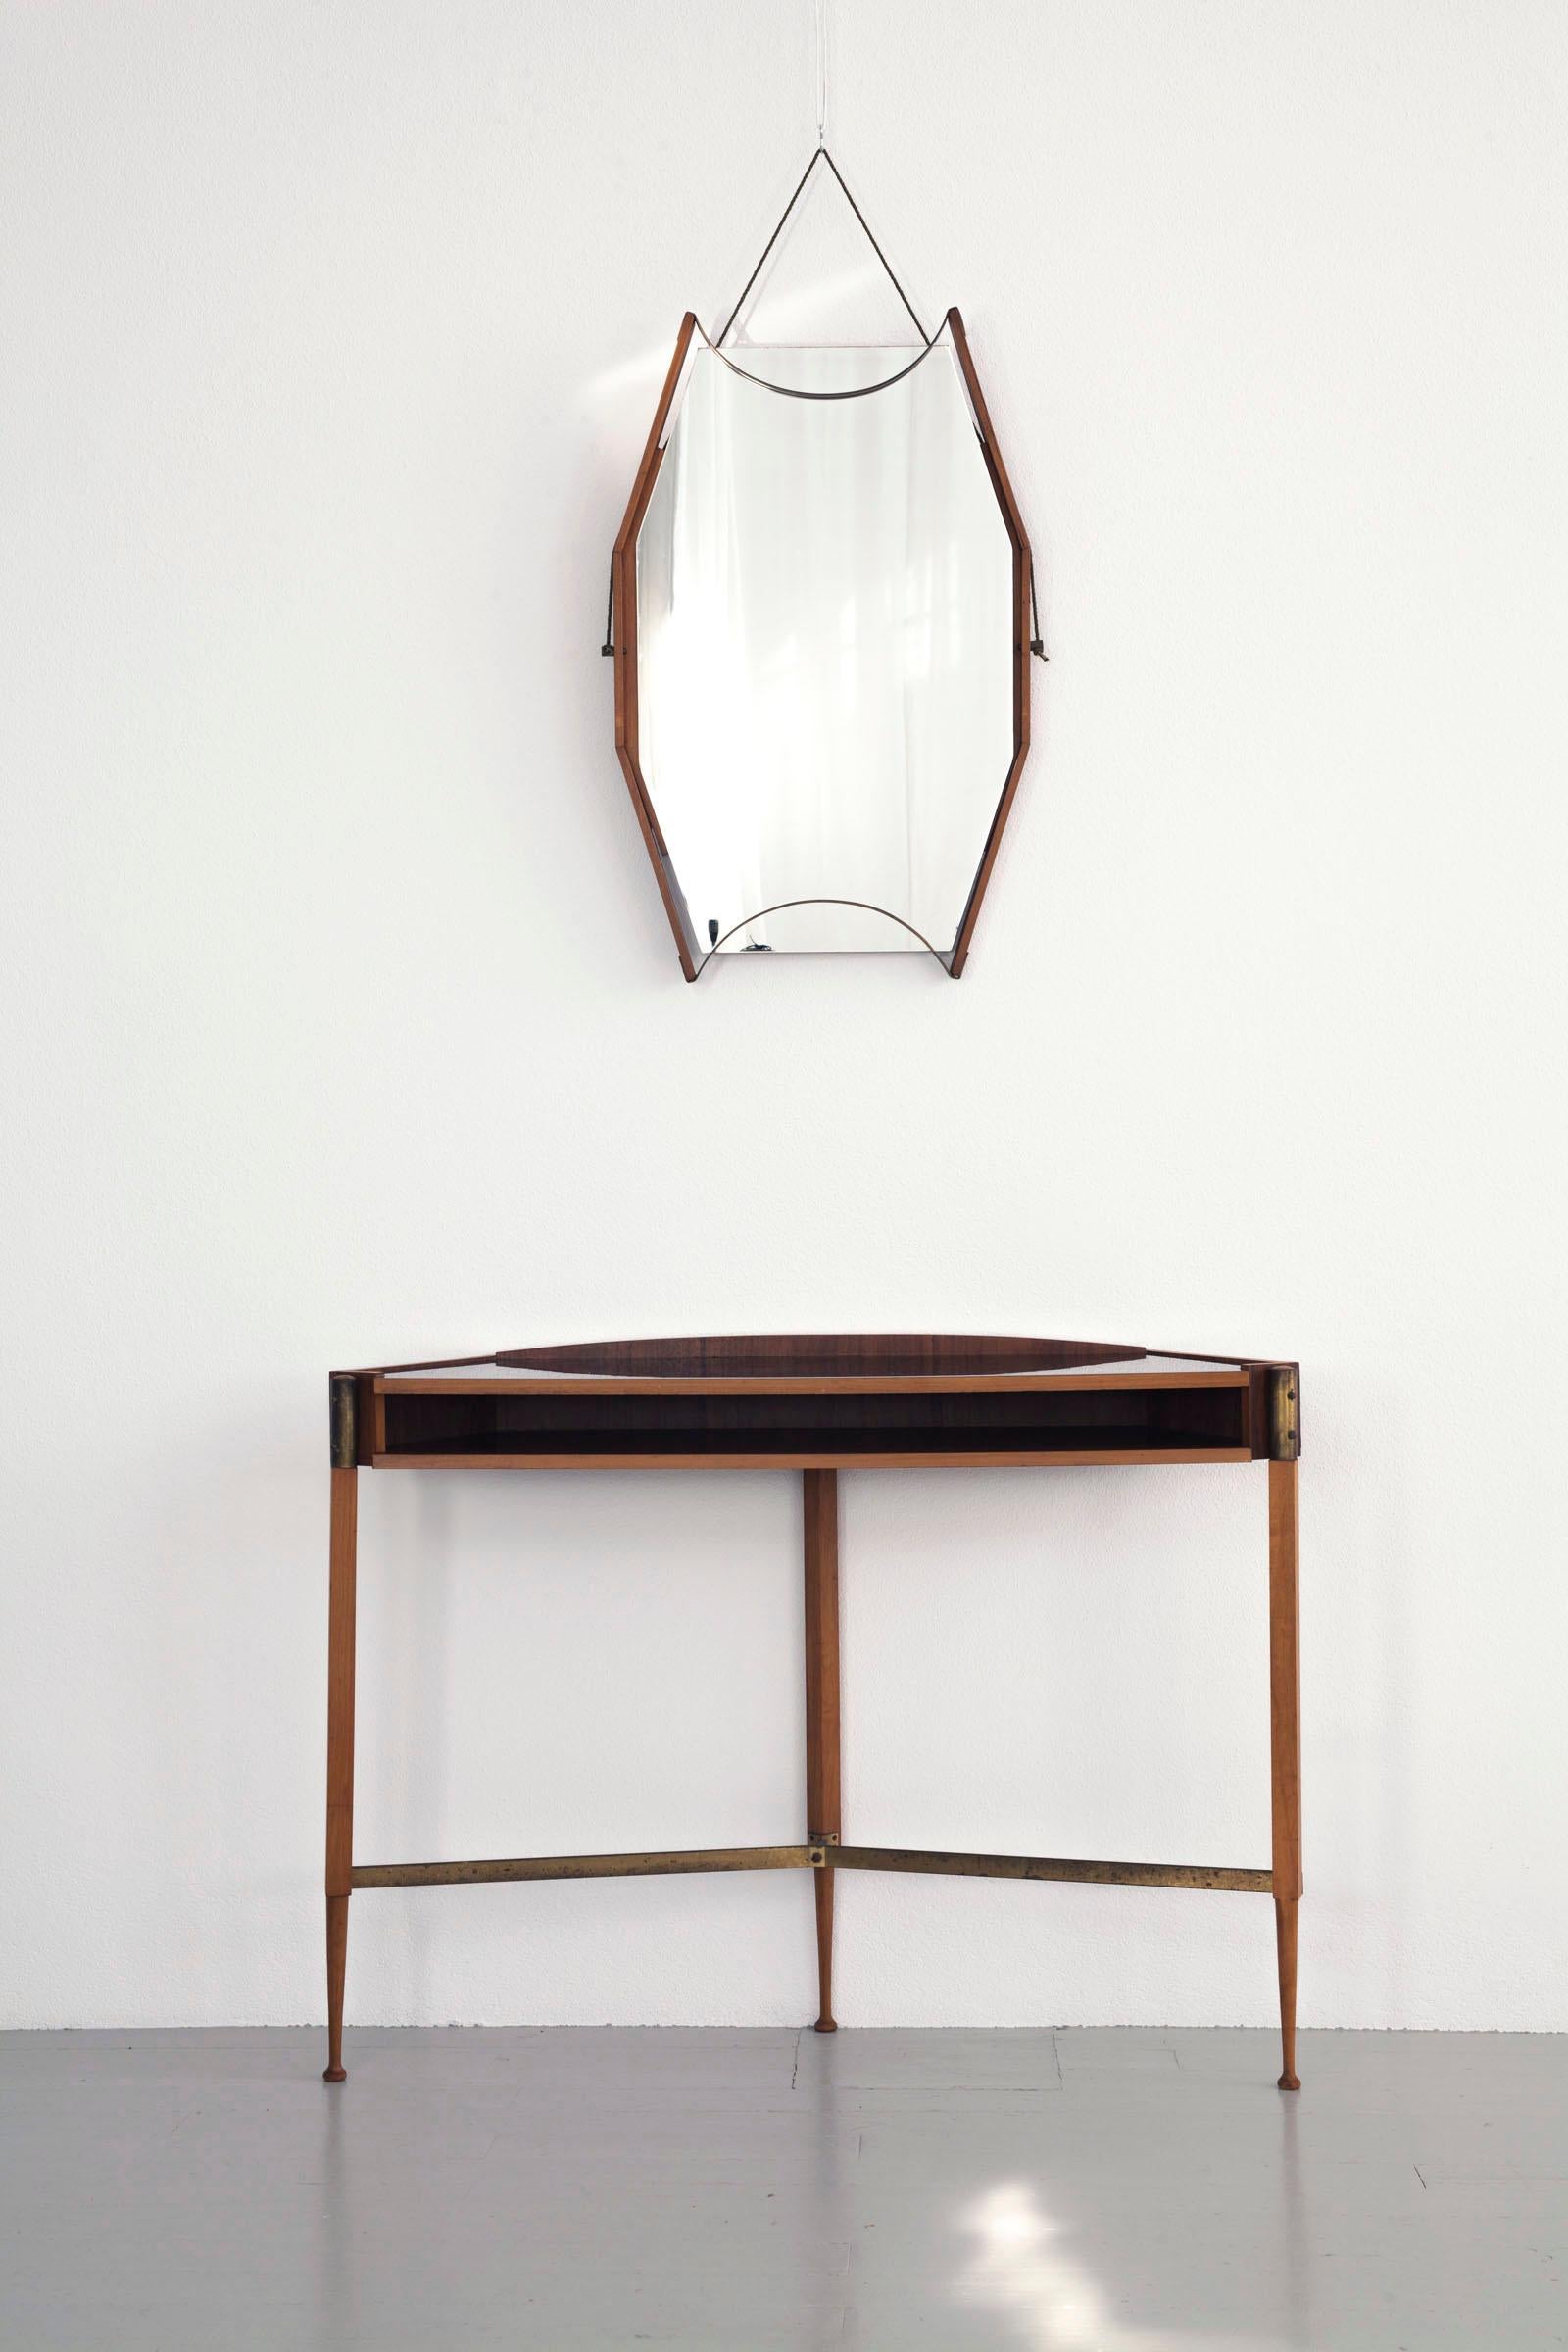 This mahogany wall console with black formica top and a wall mirror was manufactured in 1950 in Italy. Its extraordinary design is built from a combination of fine, straight shapes and rustic, angular elements like the concise brass fittings.

Feel